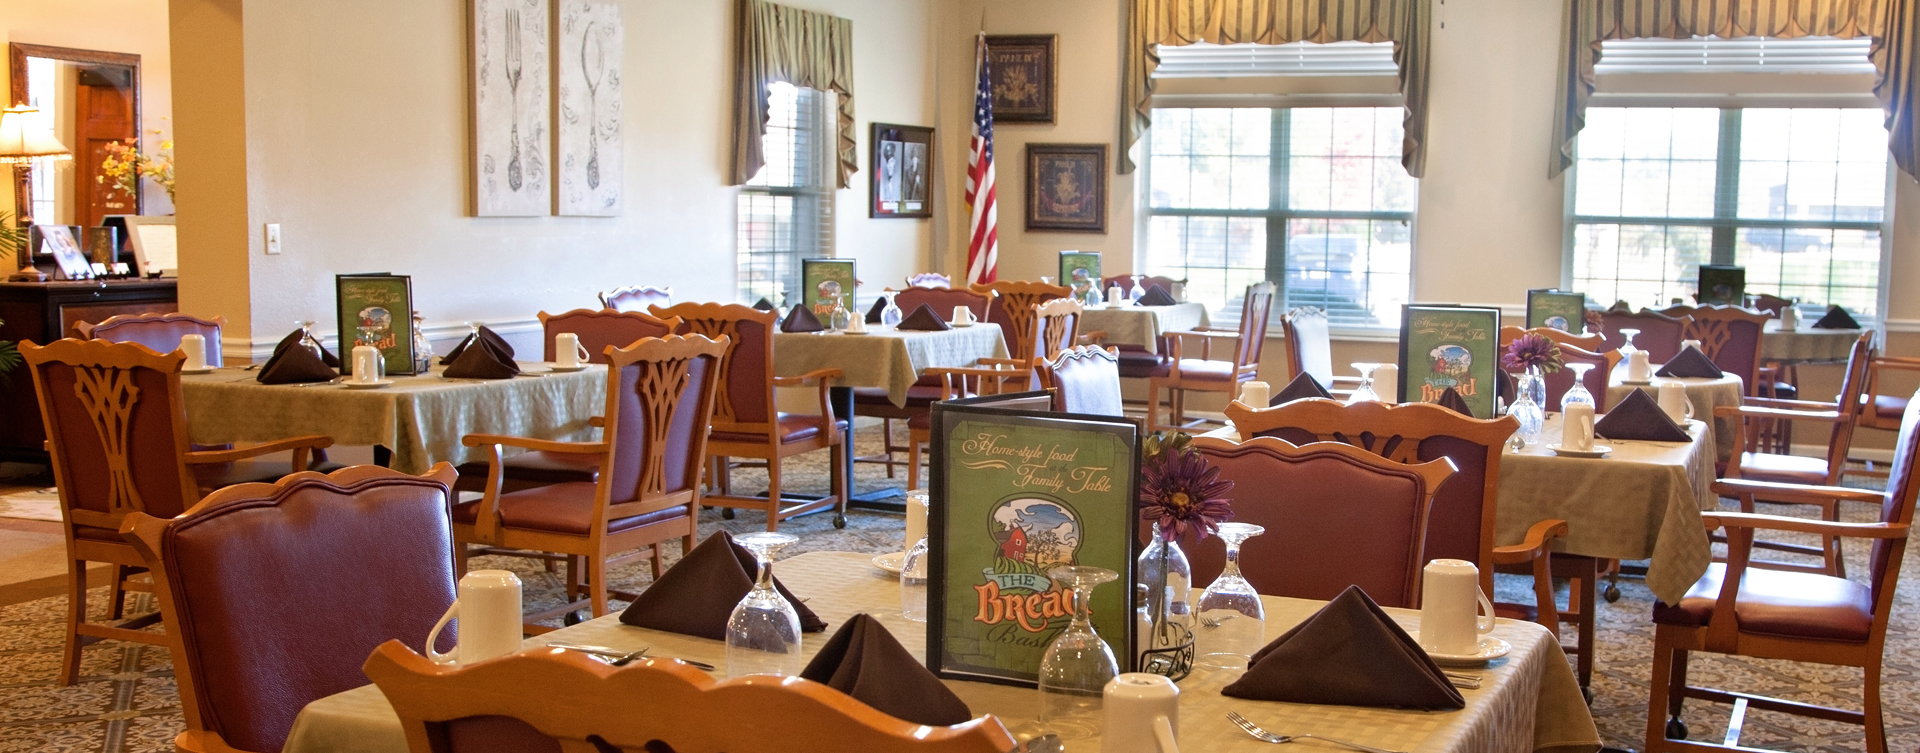 Enjoy restaurant -style meals served three times a day in our dining room at Bickford of Marion